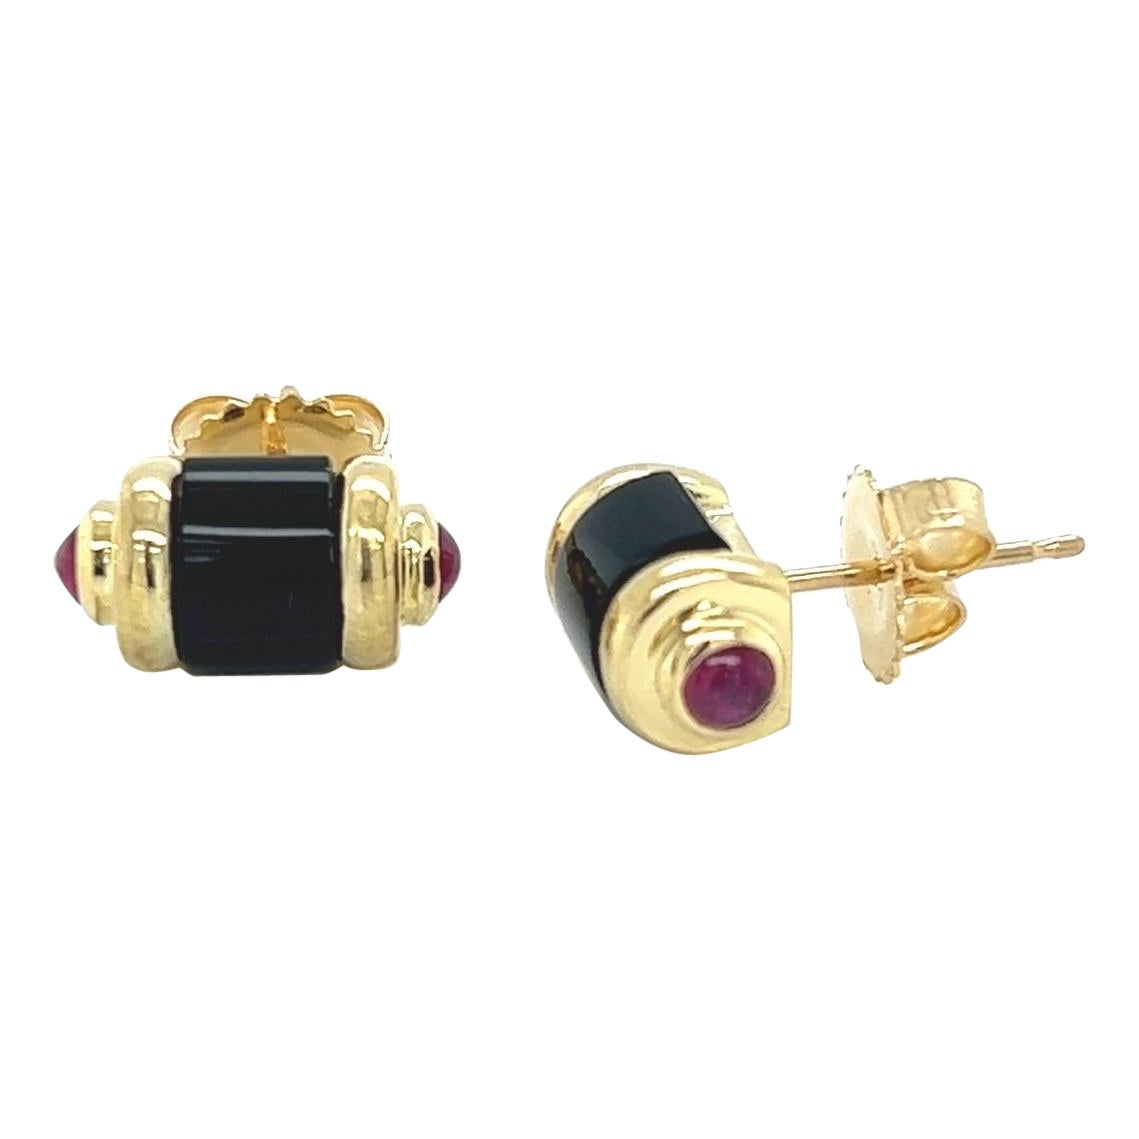 18k Yellow Gold Tube Stud Earrings with handcut Black Onyx and Cabochon Rubies